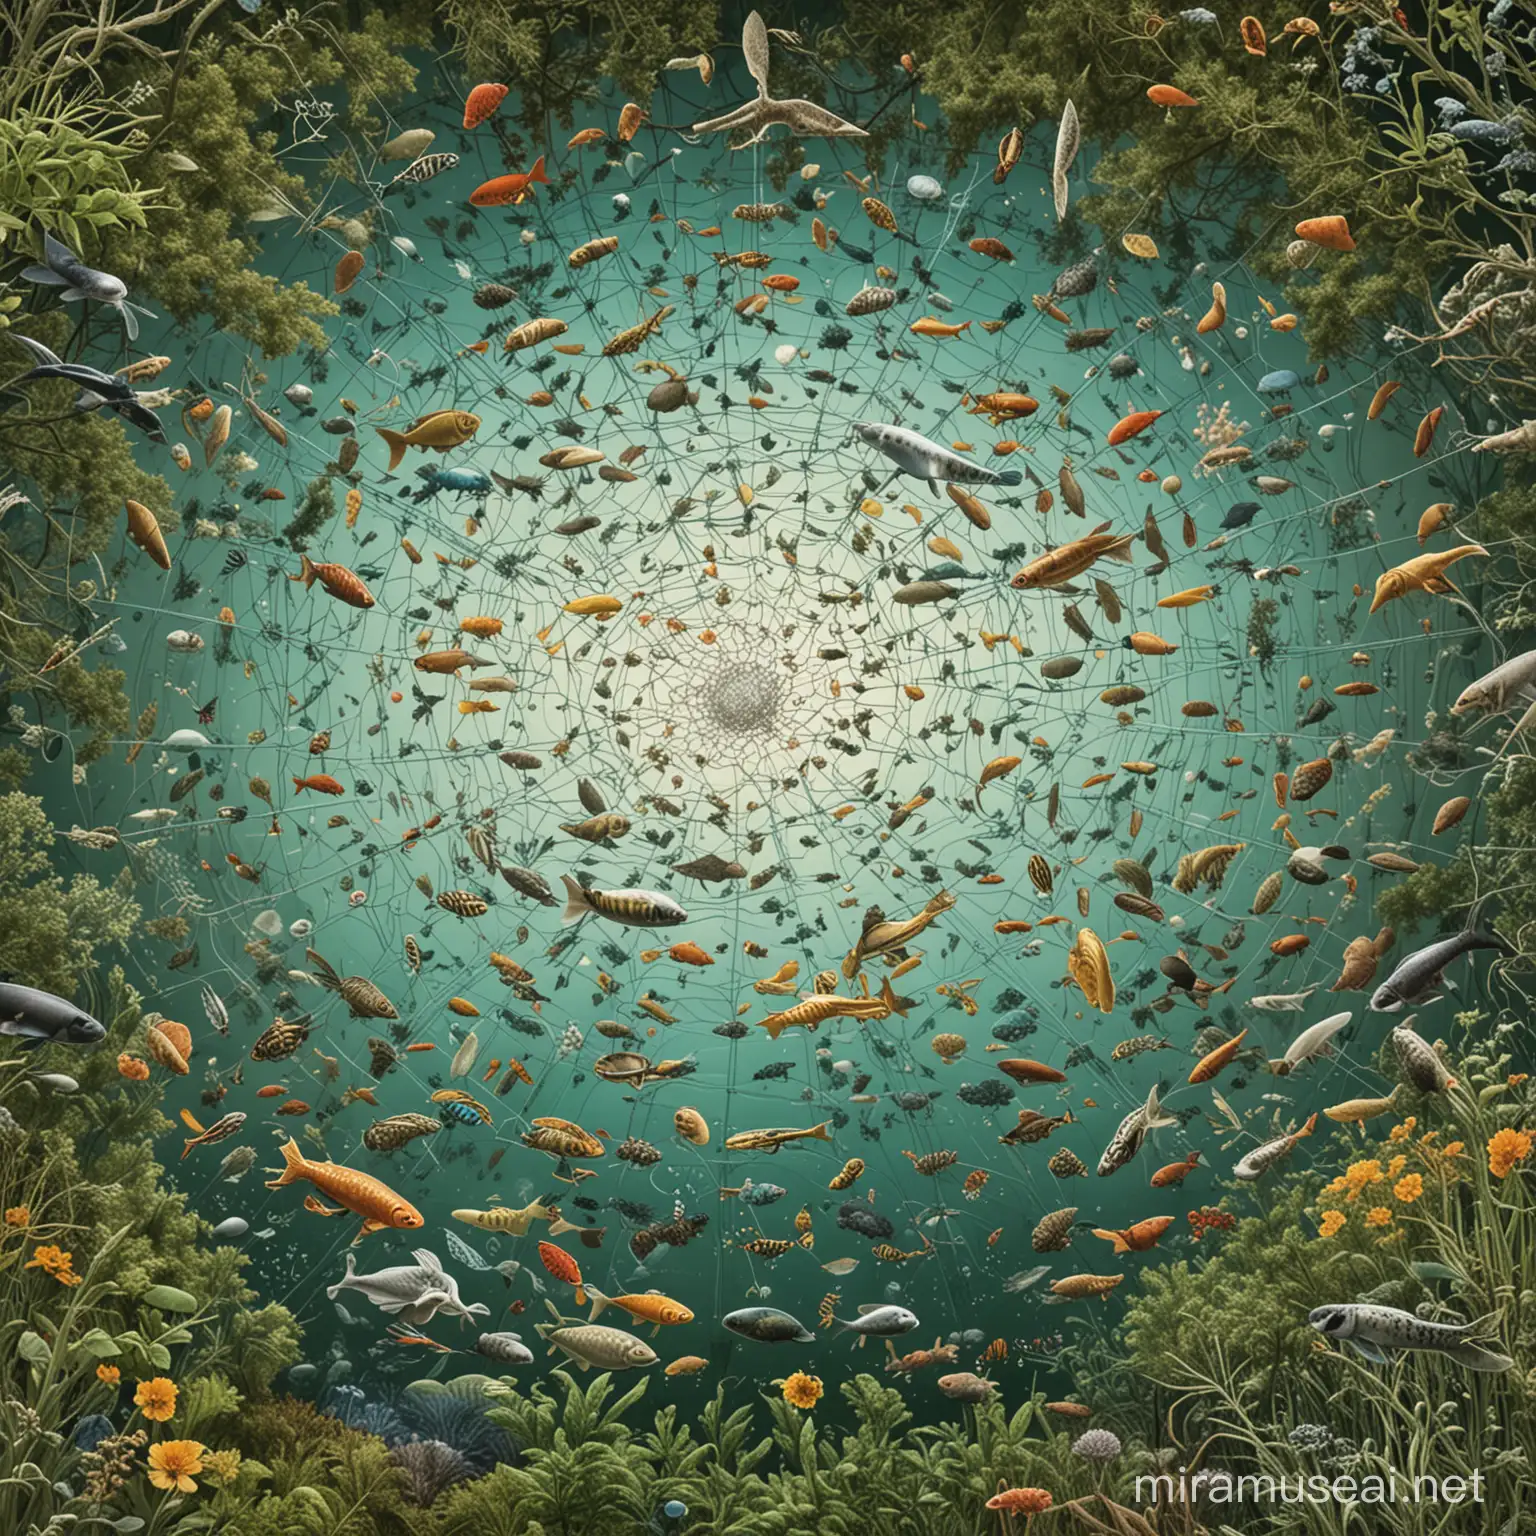  Imagine a vast and intricate network where every organism, from the smallest microbe to the largest predator, plays a crucial role in maintaining balance and harmony. In this ecosystem, each species relies on others for survival, whether through direct interactions like predator-prey relationships or indirect dependencies such as pollination or nutrient cycling. This illustration vividly showcases how changes in one part of the system can ripple outwards, affecting every other component. It highlights the delicate interconnectedness of all living things and emphasizes the importance of understanding and preserving the intricate web of life for the health and sustainability of our planet.